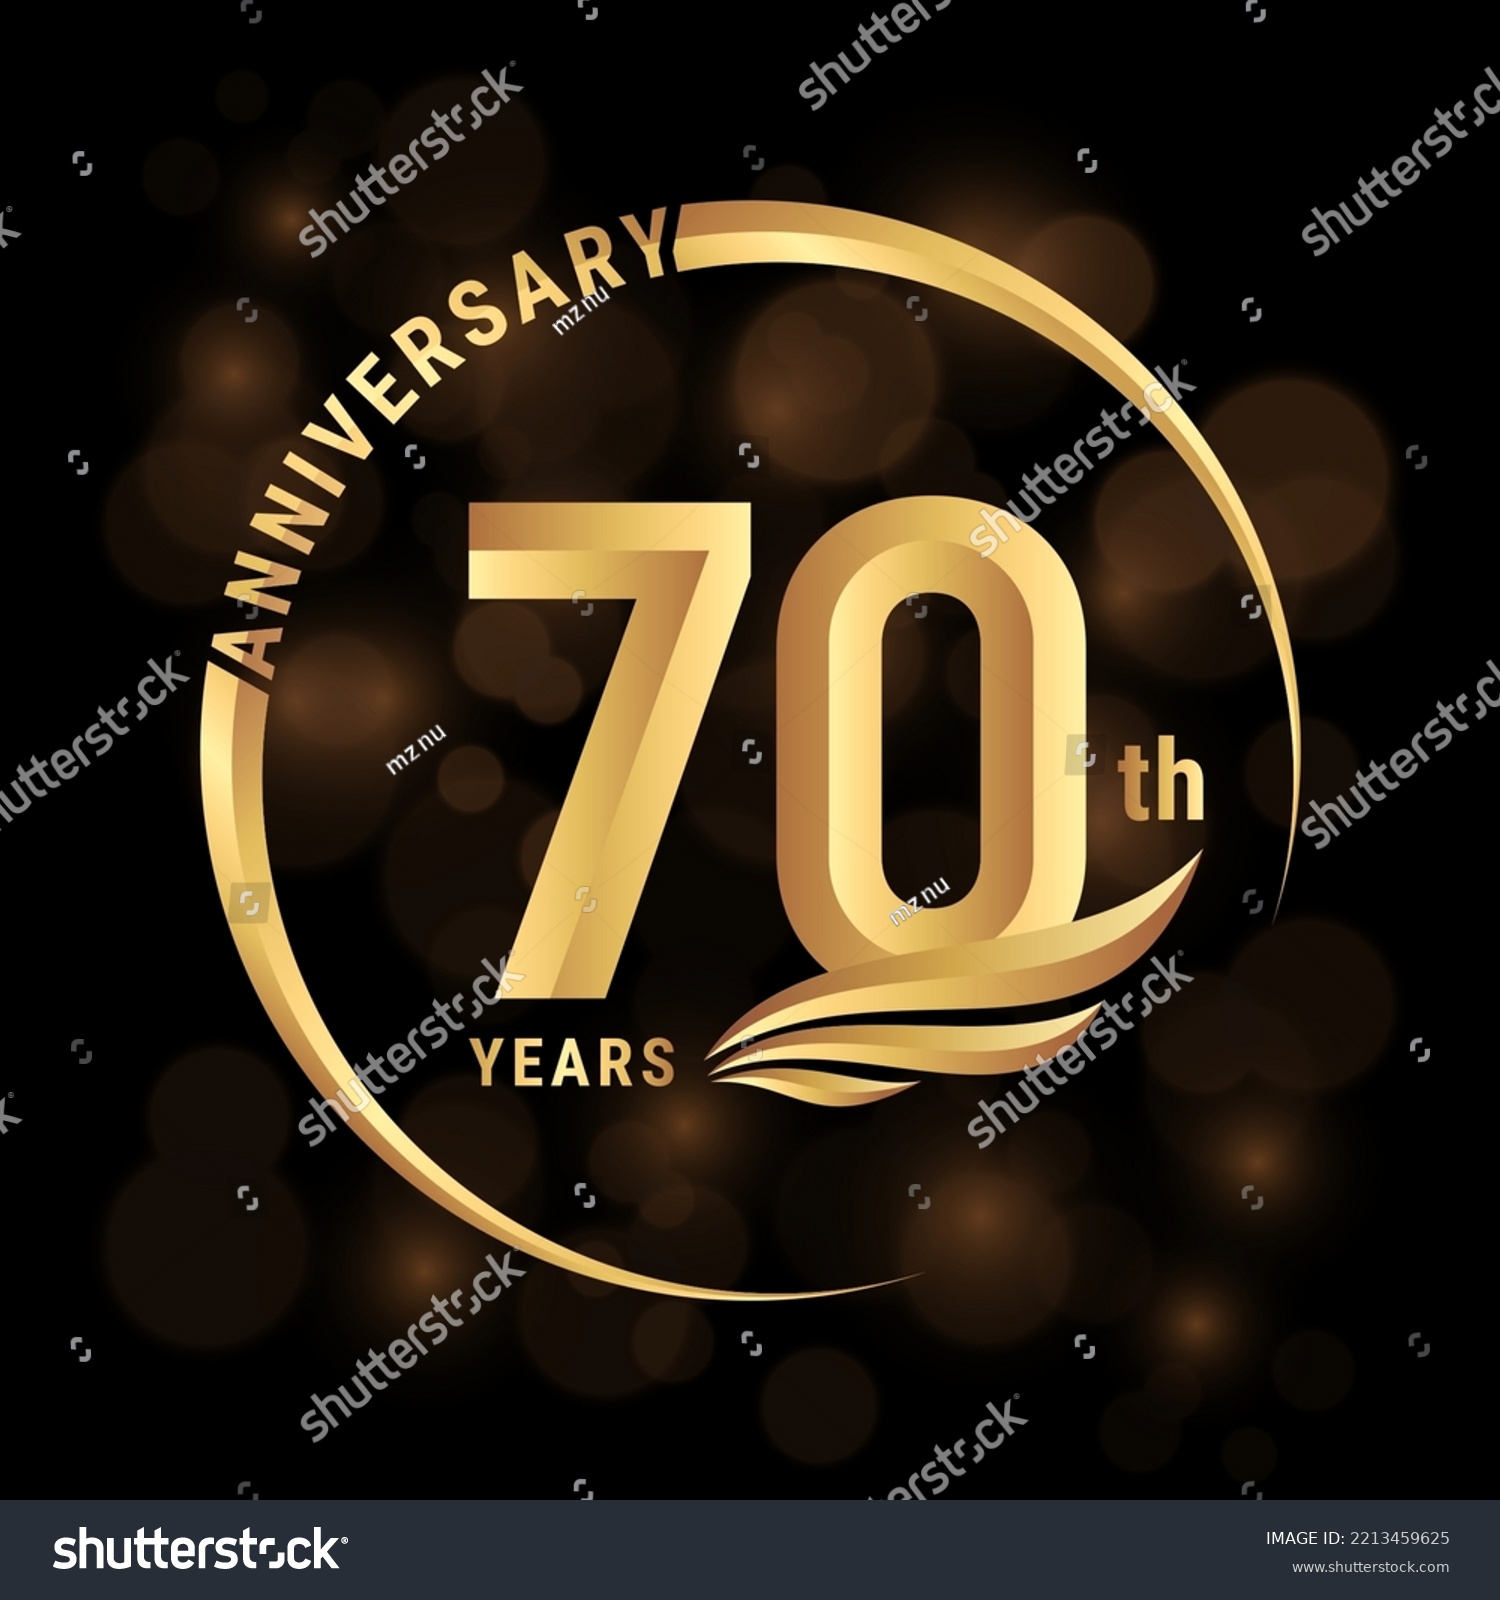 SVG of 70th Anniversary Logo, Logo design with gold color wings for poster, banner, brochure, magazine, web, booklet, invitation or greeting card. Vector illustration svg